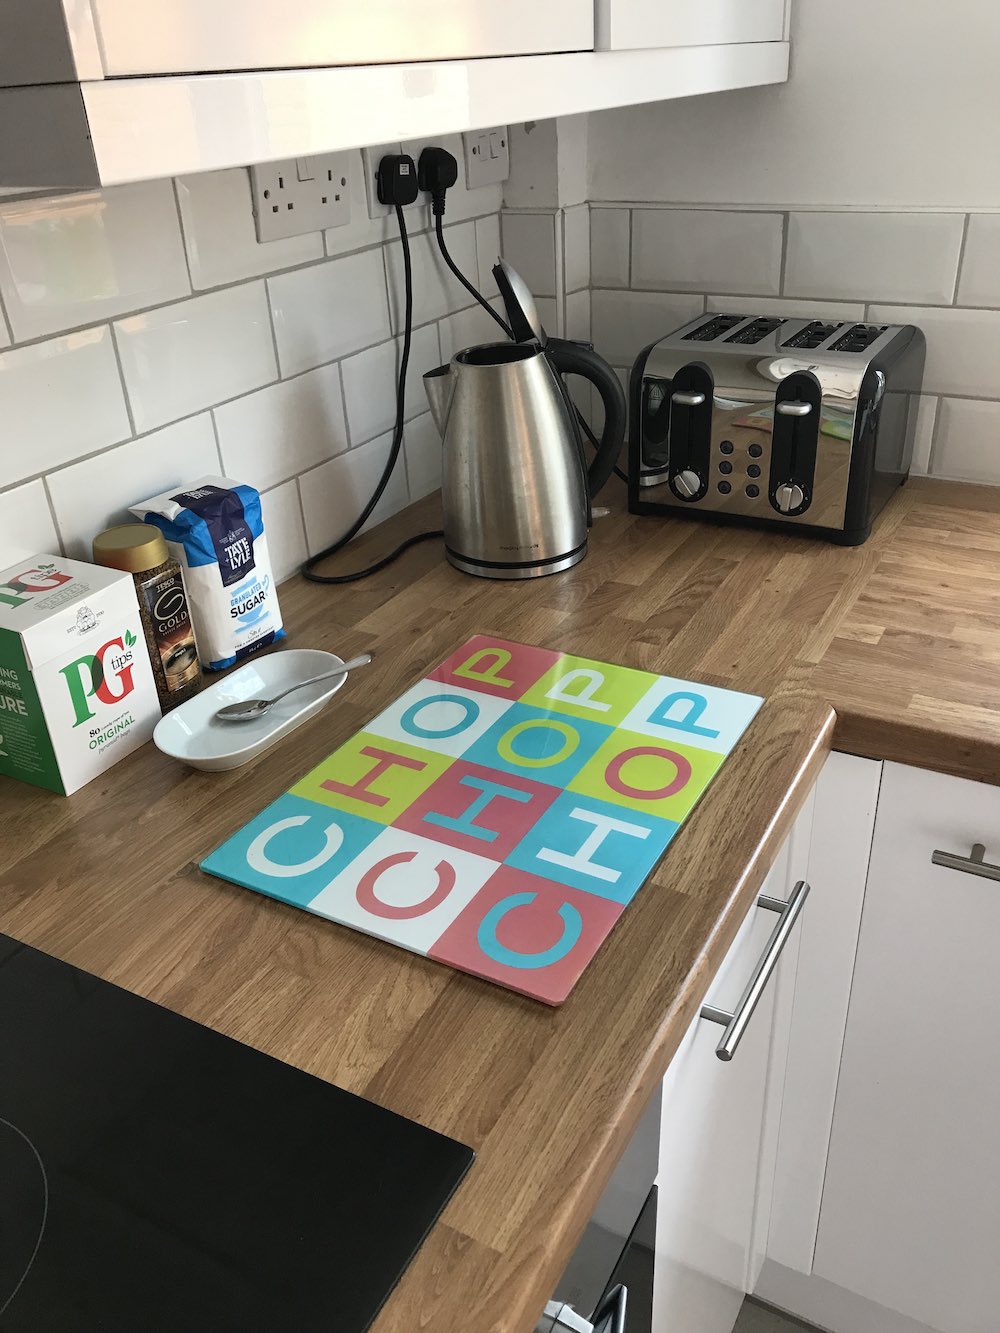 Starter pack of tea and coffee in the kitchen